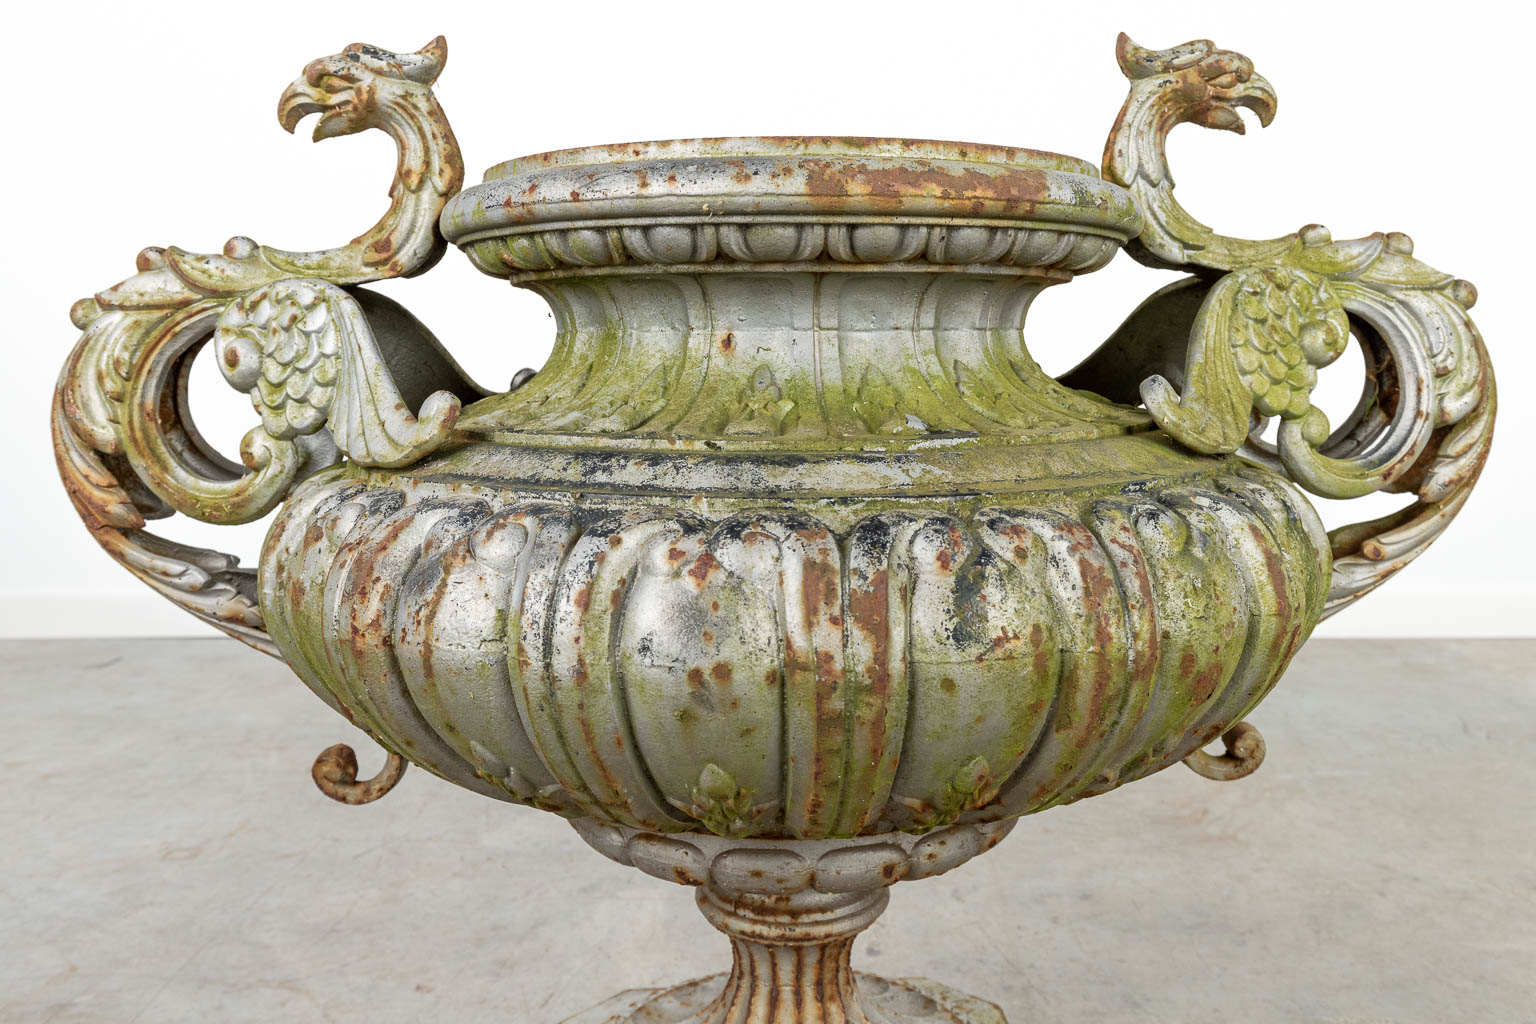 An antique garden vase made of cast iron and decorated with Phoenixes. (H:62cm)